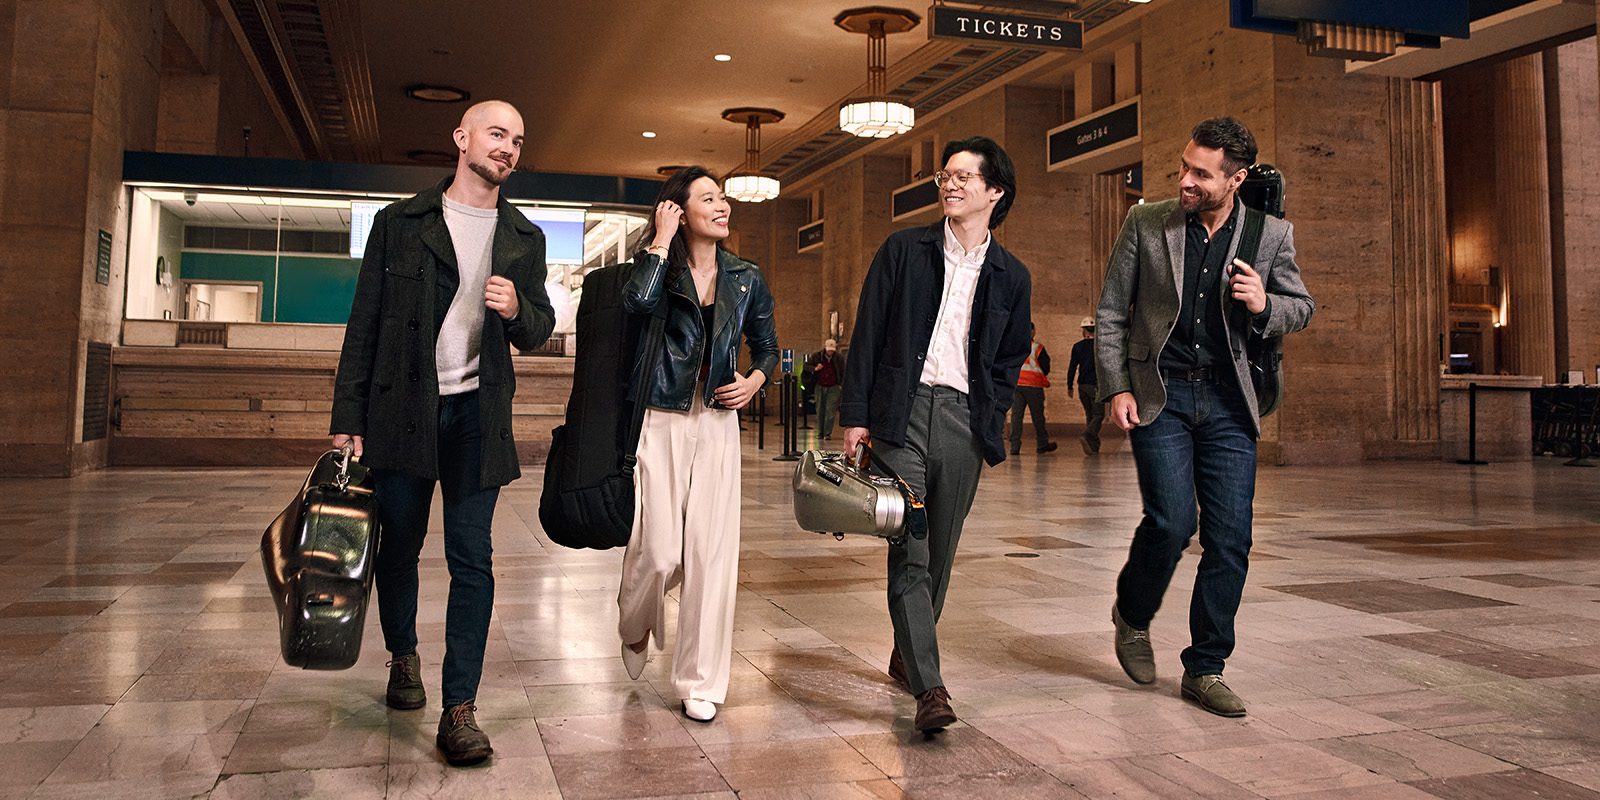 Four musicians walk in a train station.